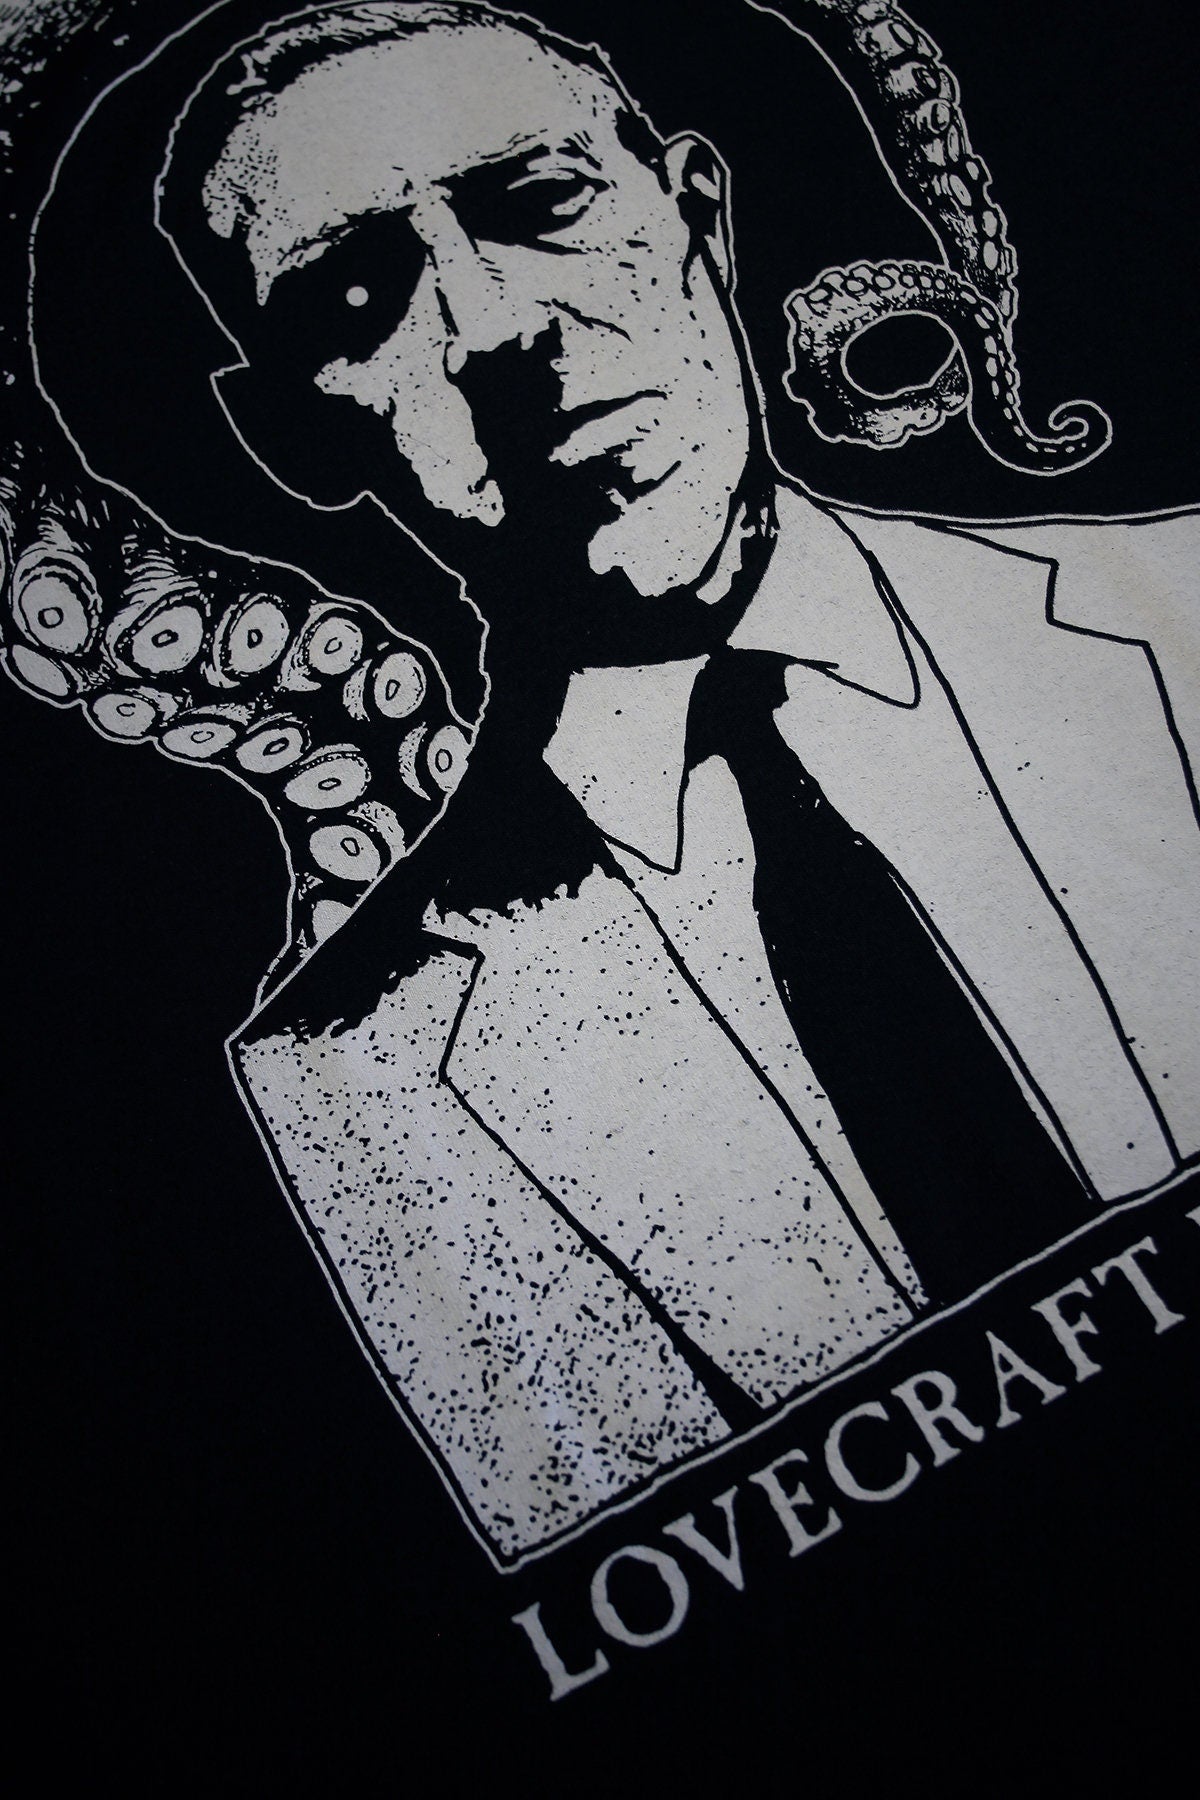 Lovecraft Fhtagn - T-shirt female fitted